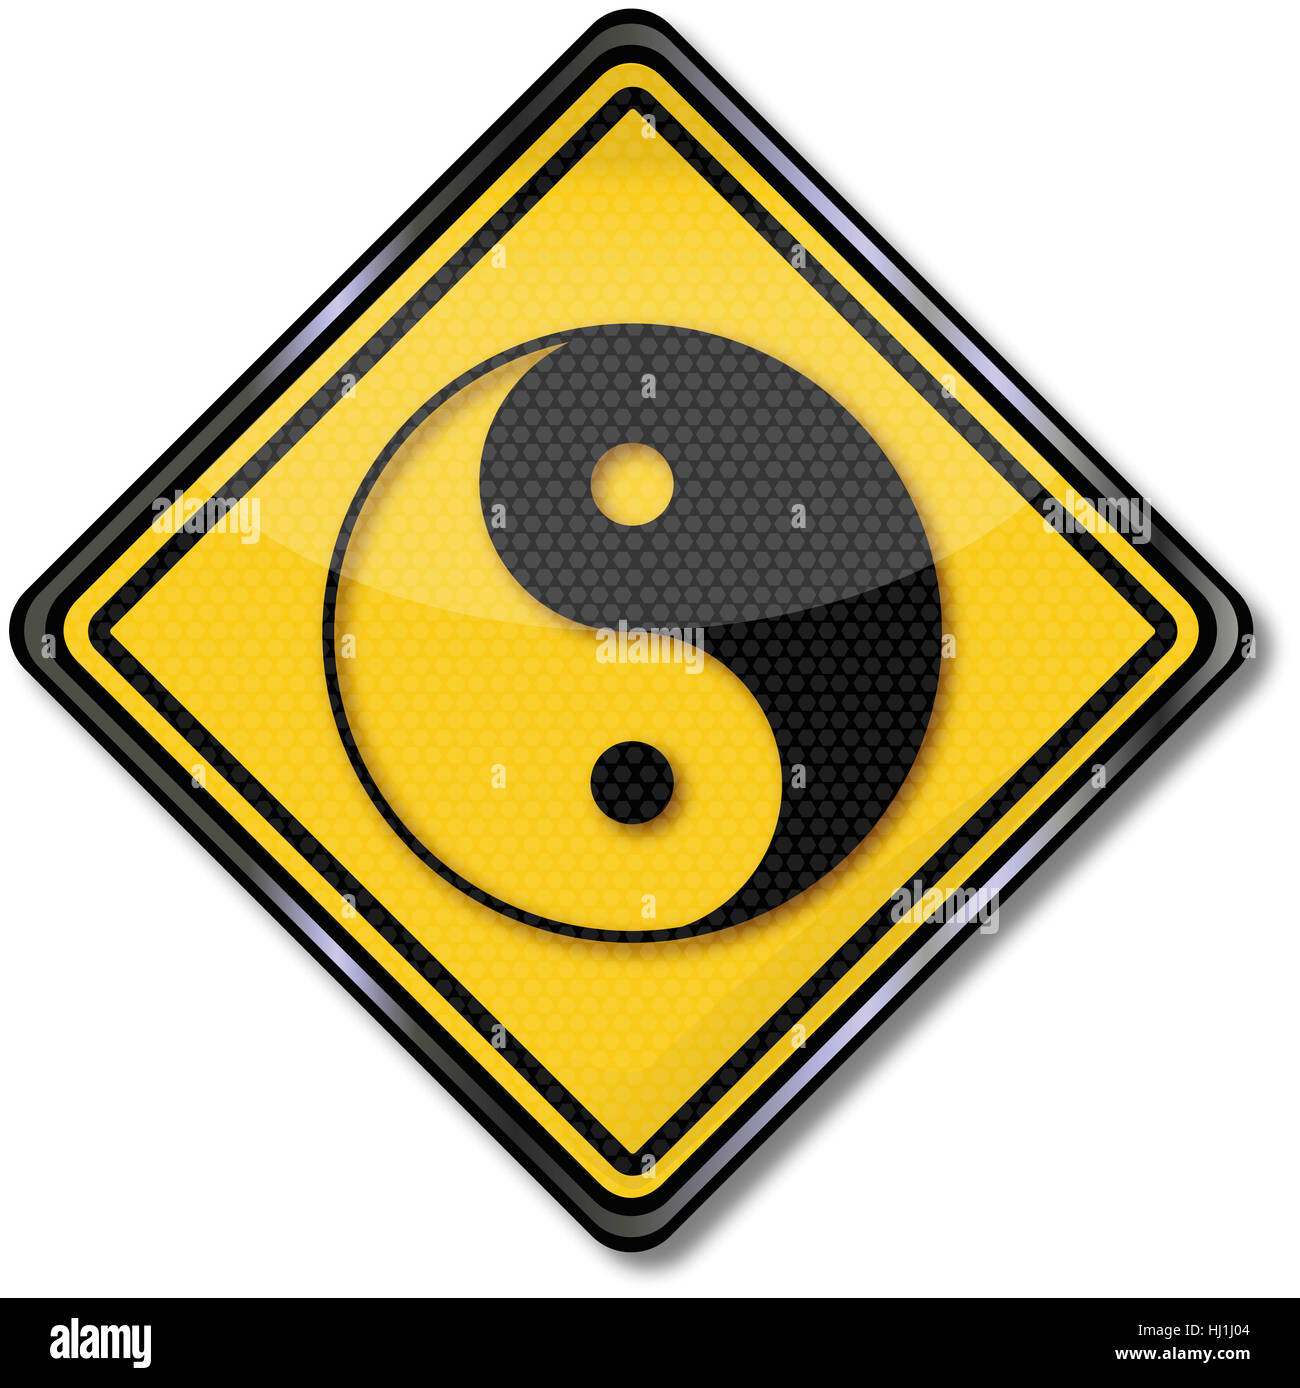 health, button, homeopathy, acupuncture, yang, shield, sign, signal, health, Stock Photo